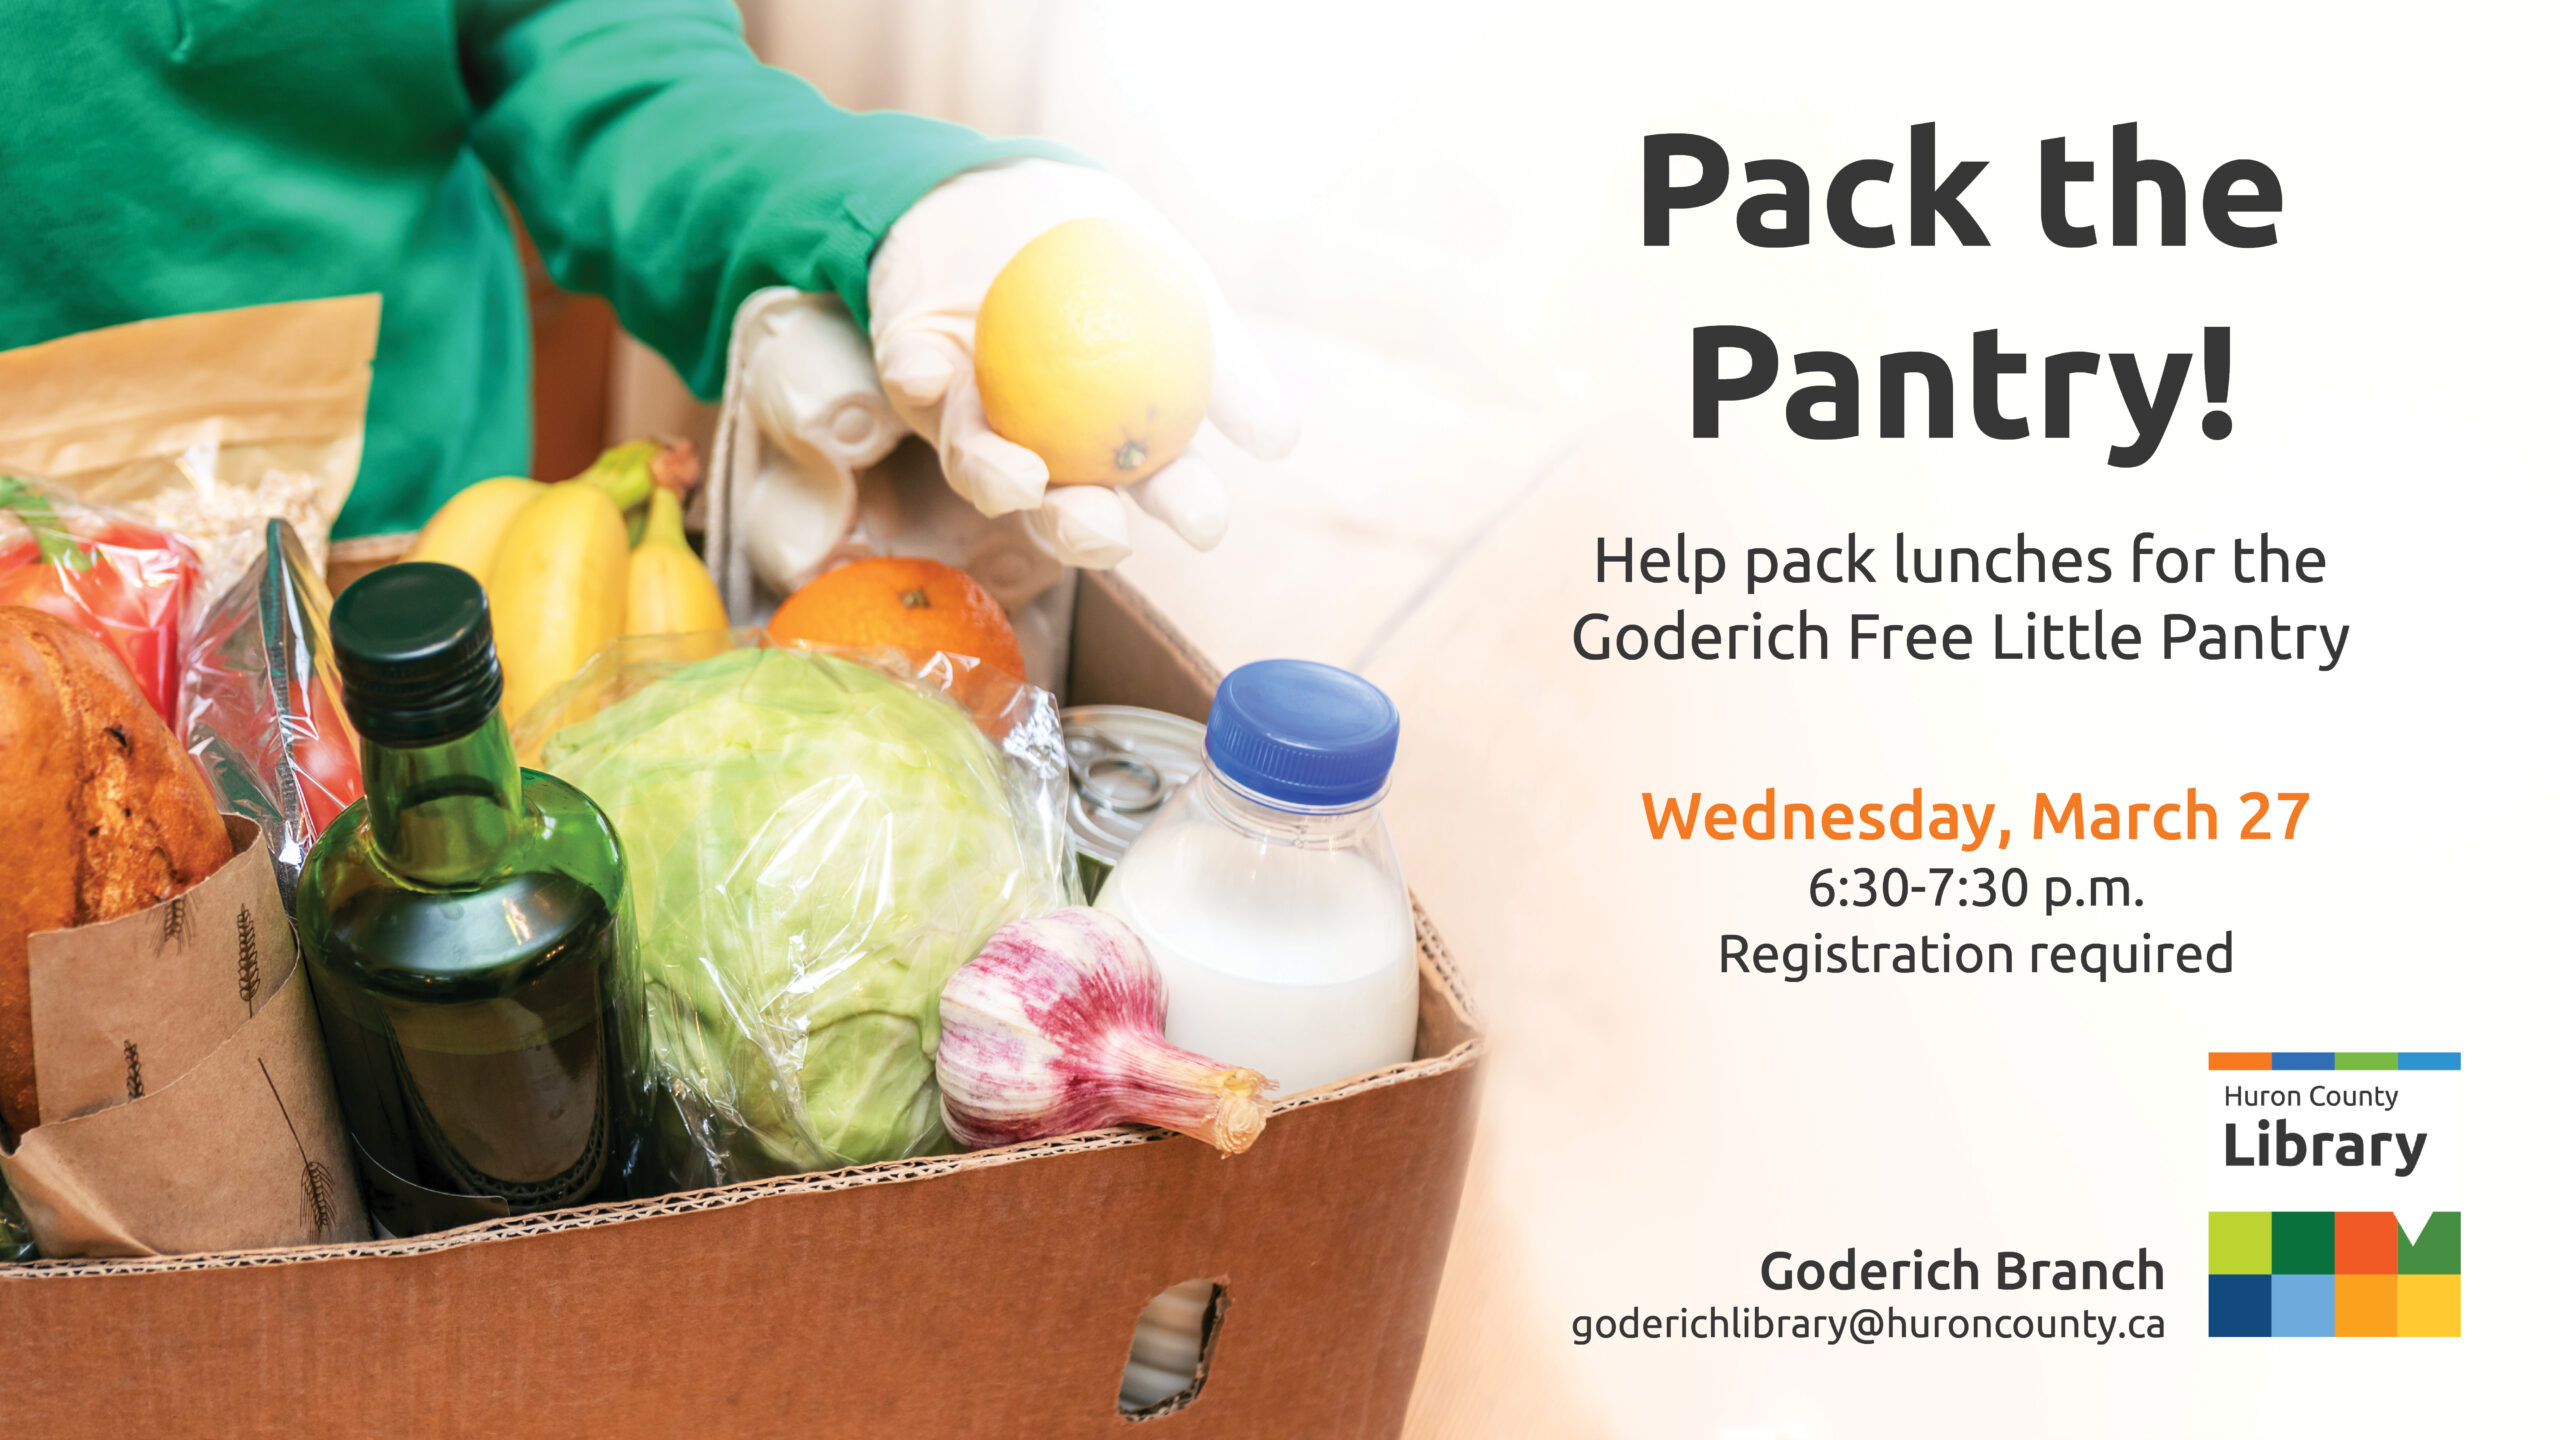 Photo of a box of food with text promoting Pack the Pantry at Goderich Branch